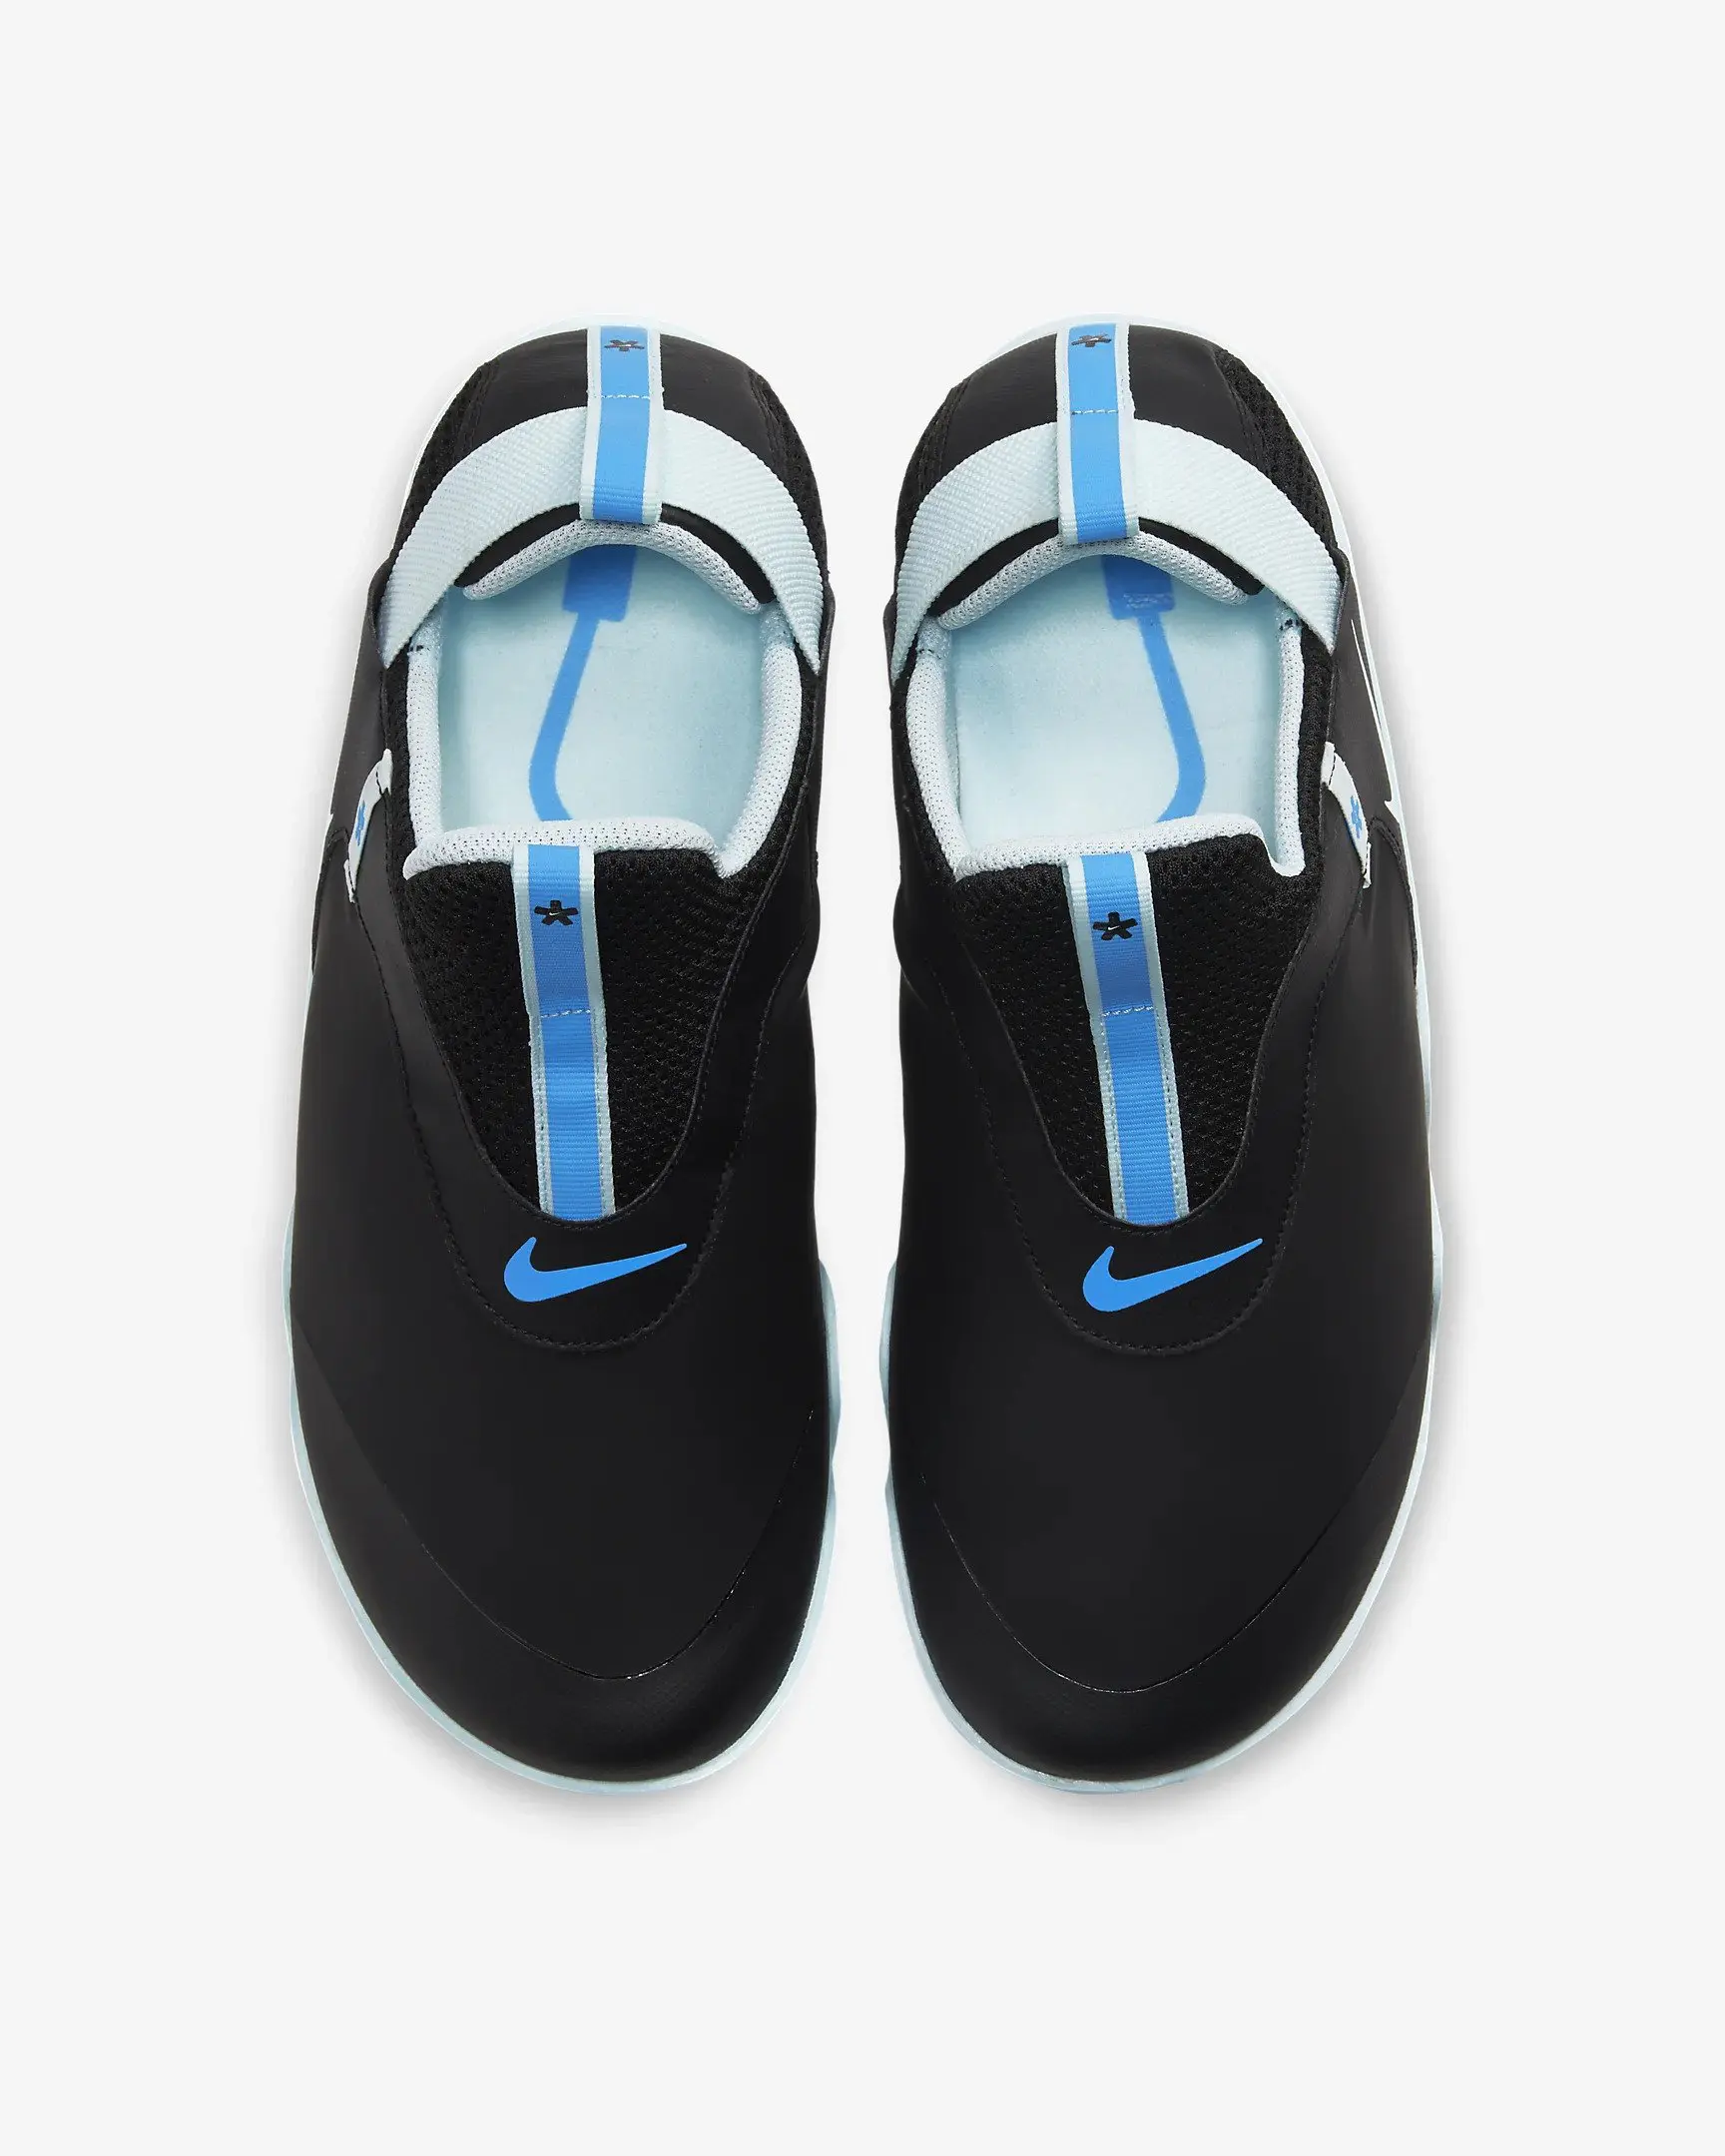 new nike medical shoes price